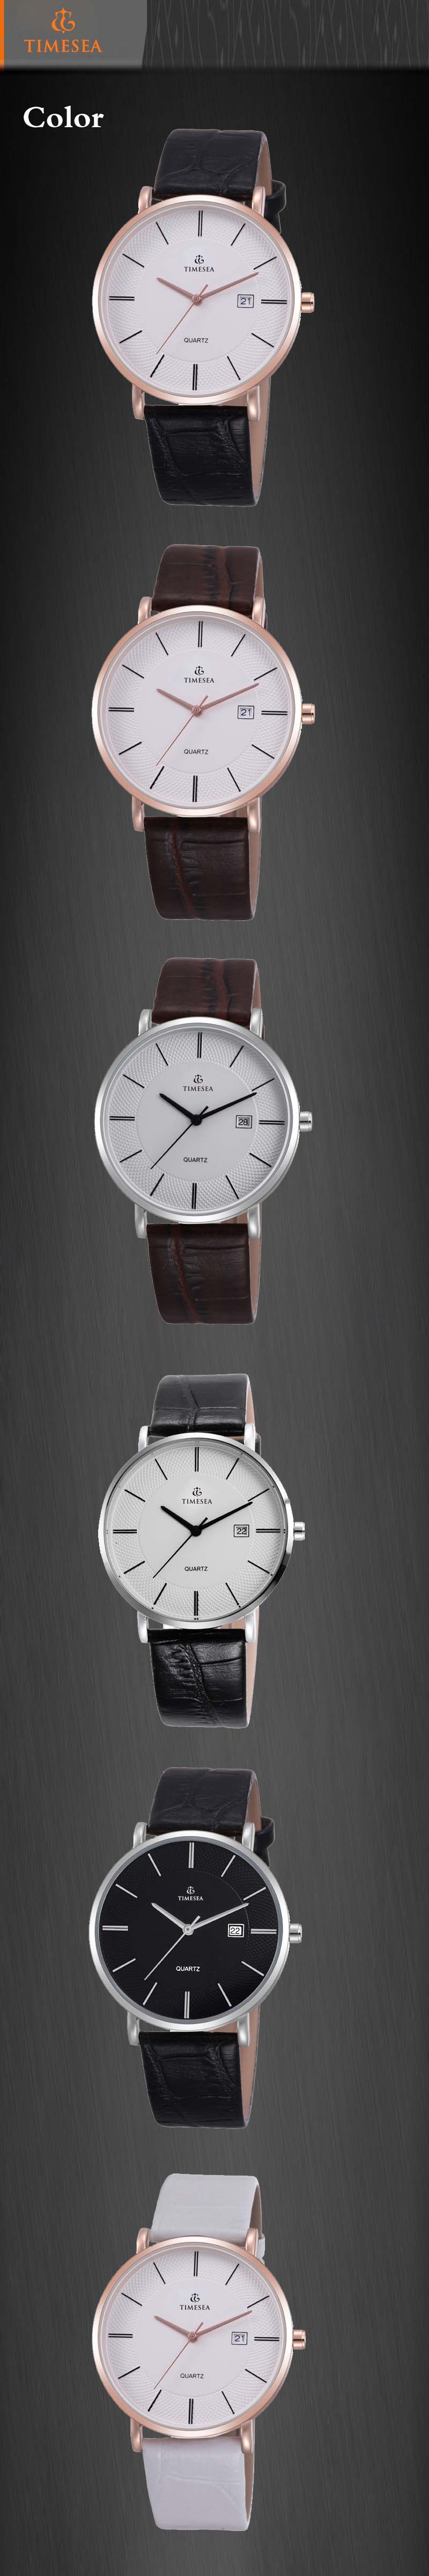 Hot Selling Brand Leather Watch Men 72335